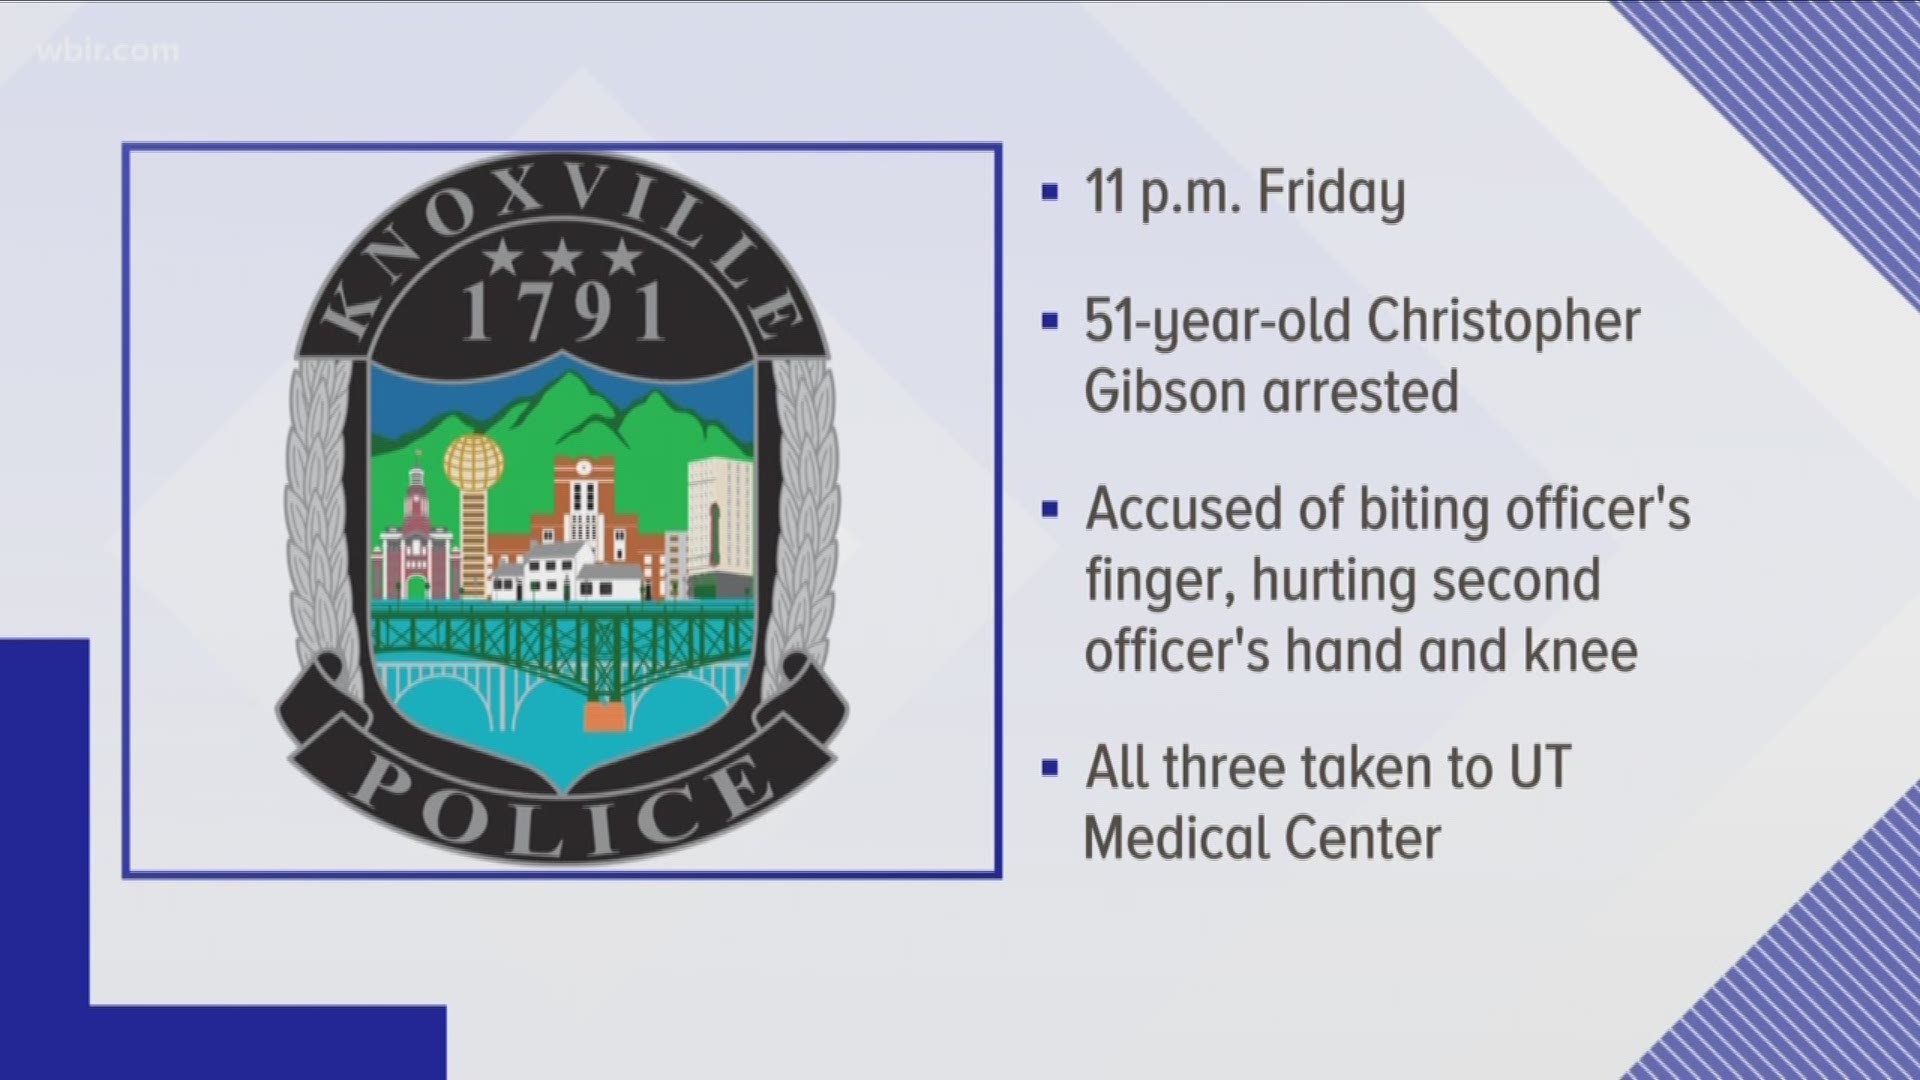 Police say 51-year-old Christopher Gibson bit the finger of one of the officers and injured a second officer's hand and knee when he resisted arrest.